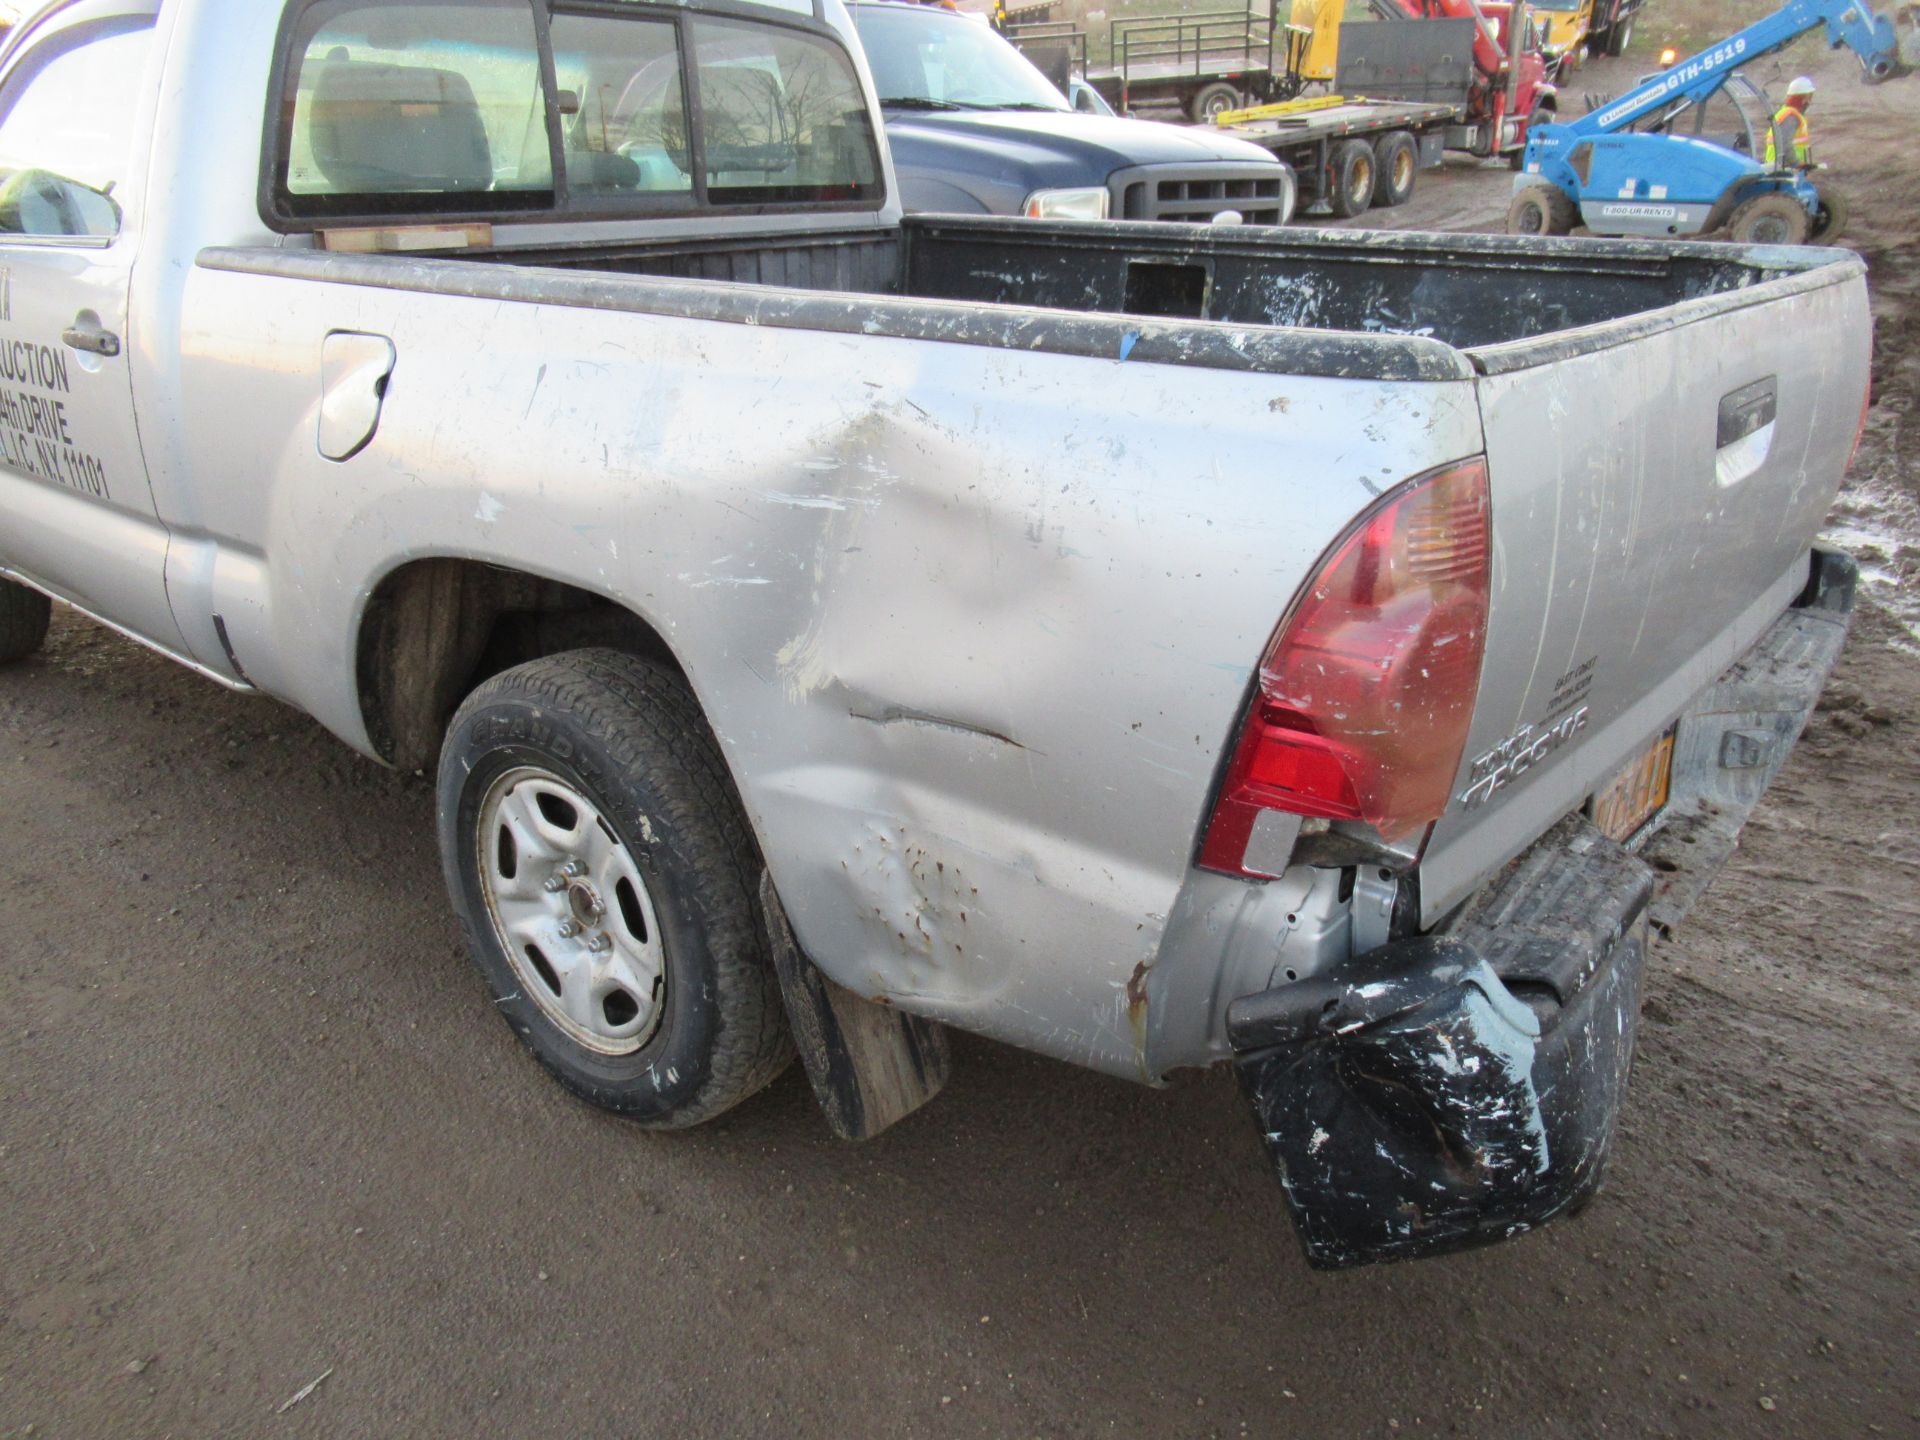 2008 TOYOTA TACOMA PICKUP TRUCK, AUTOMATIC, WITH APPROXIMATELY 105,732 MILES, VIN: 5TENX22N382504186 - Image 2 of 12